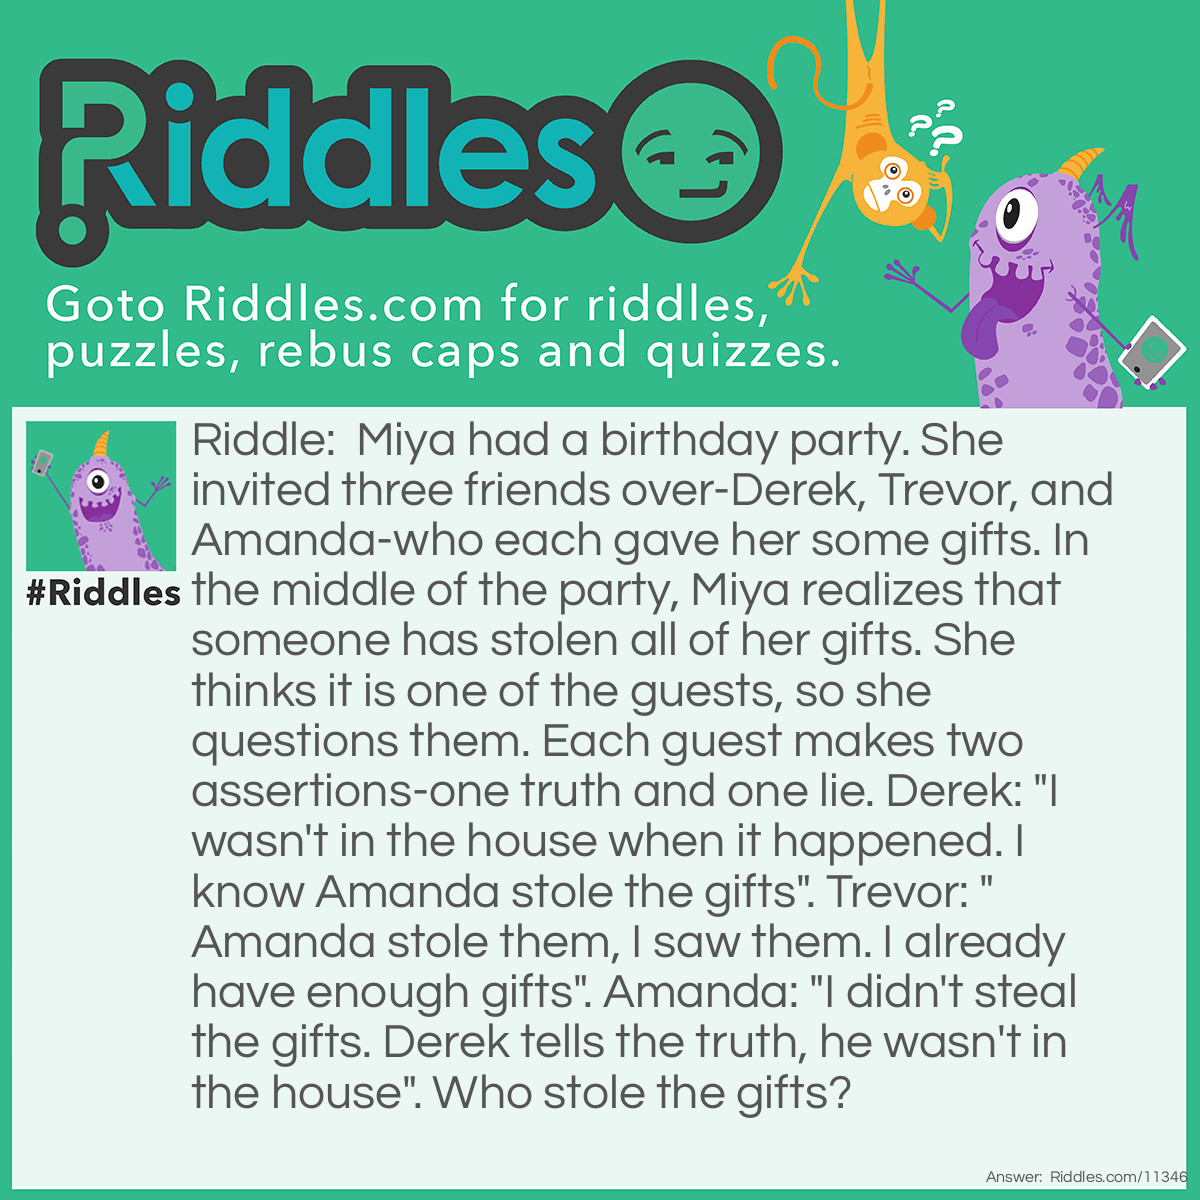 Riddle: Miya had a birthday party. She invited three friends over-Derek, Trevor, and Amanda-who each gave her some gifts. In the middle of the party, Miya realizes that someone has stolen all of her gifts. She thinks it is one of the guests, so she questions them. Each guest makes two assertions-one truth and one lie. Derek: "I wasn't in the house when it happened. I know Amanda stole the gifts". Trevor: "Amanda stole them, I saw them. I already have enough gifts". Amanda: "I didn't steal the gifts. Derek tells the truth, he wasn't in the house". Who stole the gifts? Answer: Trevor stole the gifts. If Derek was the thief, both of his assertions would have been false. And if Amanda was the thief, both of Derek's assertions would have been true. Both cases go against the rules, so Trevor is the thief.